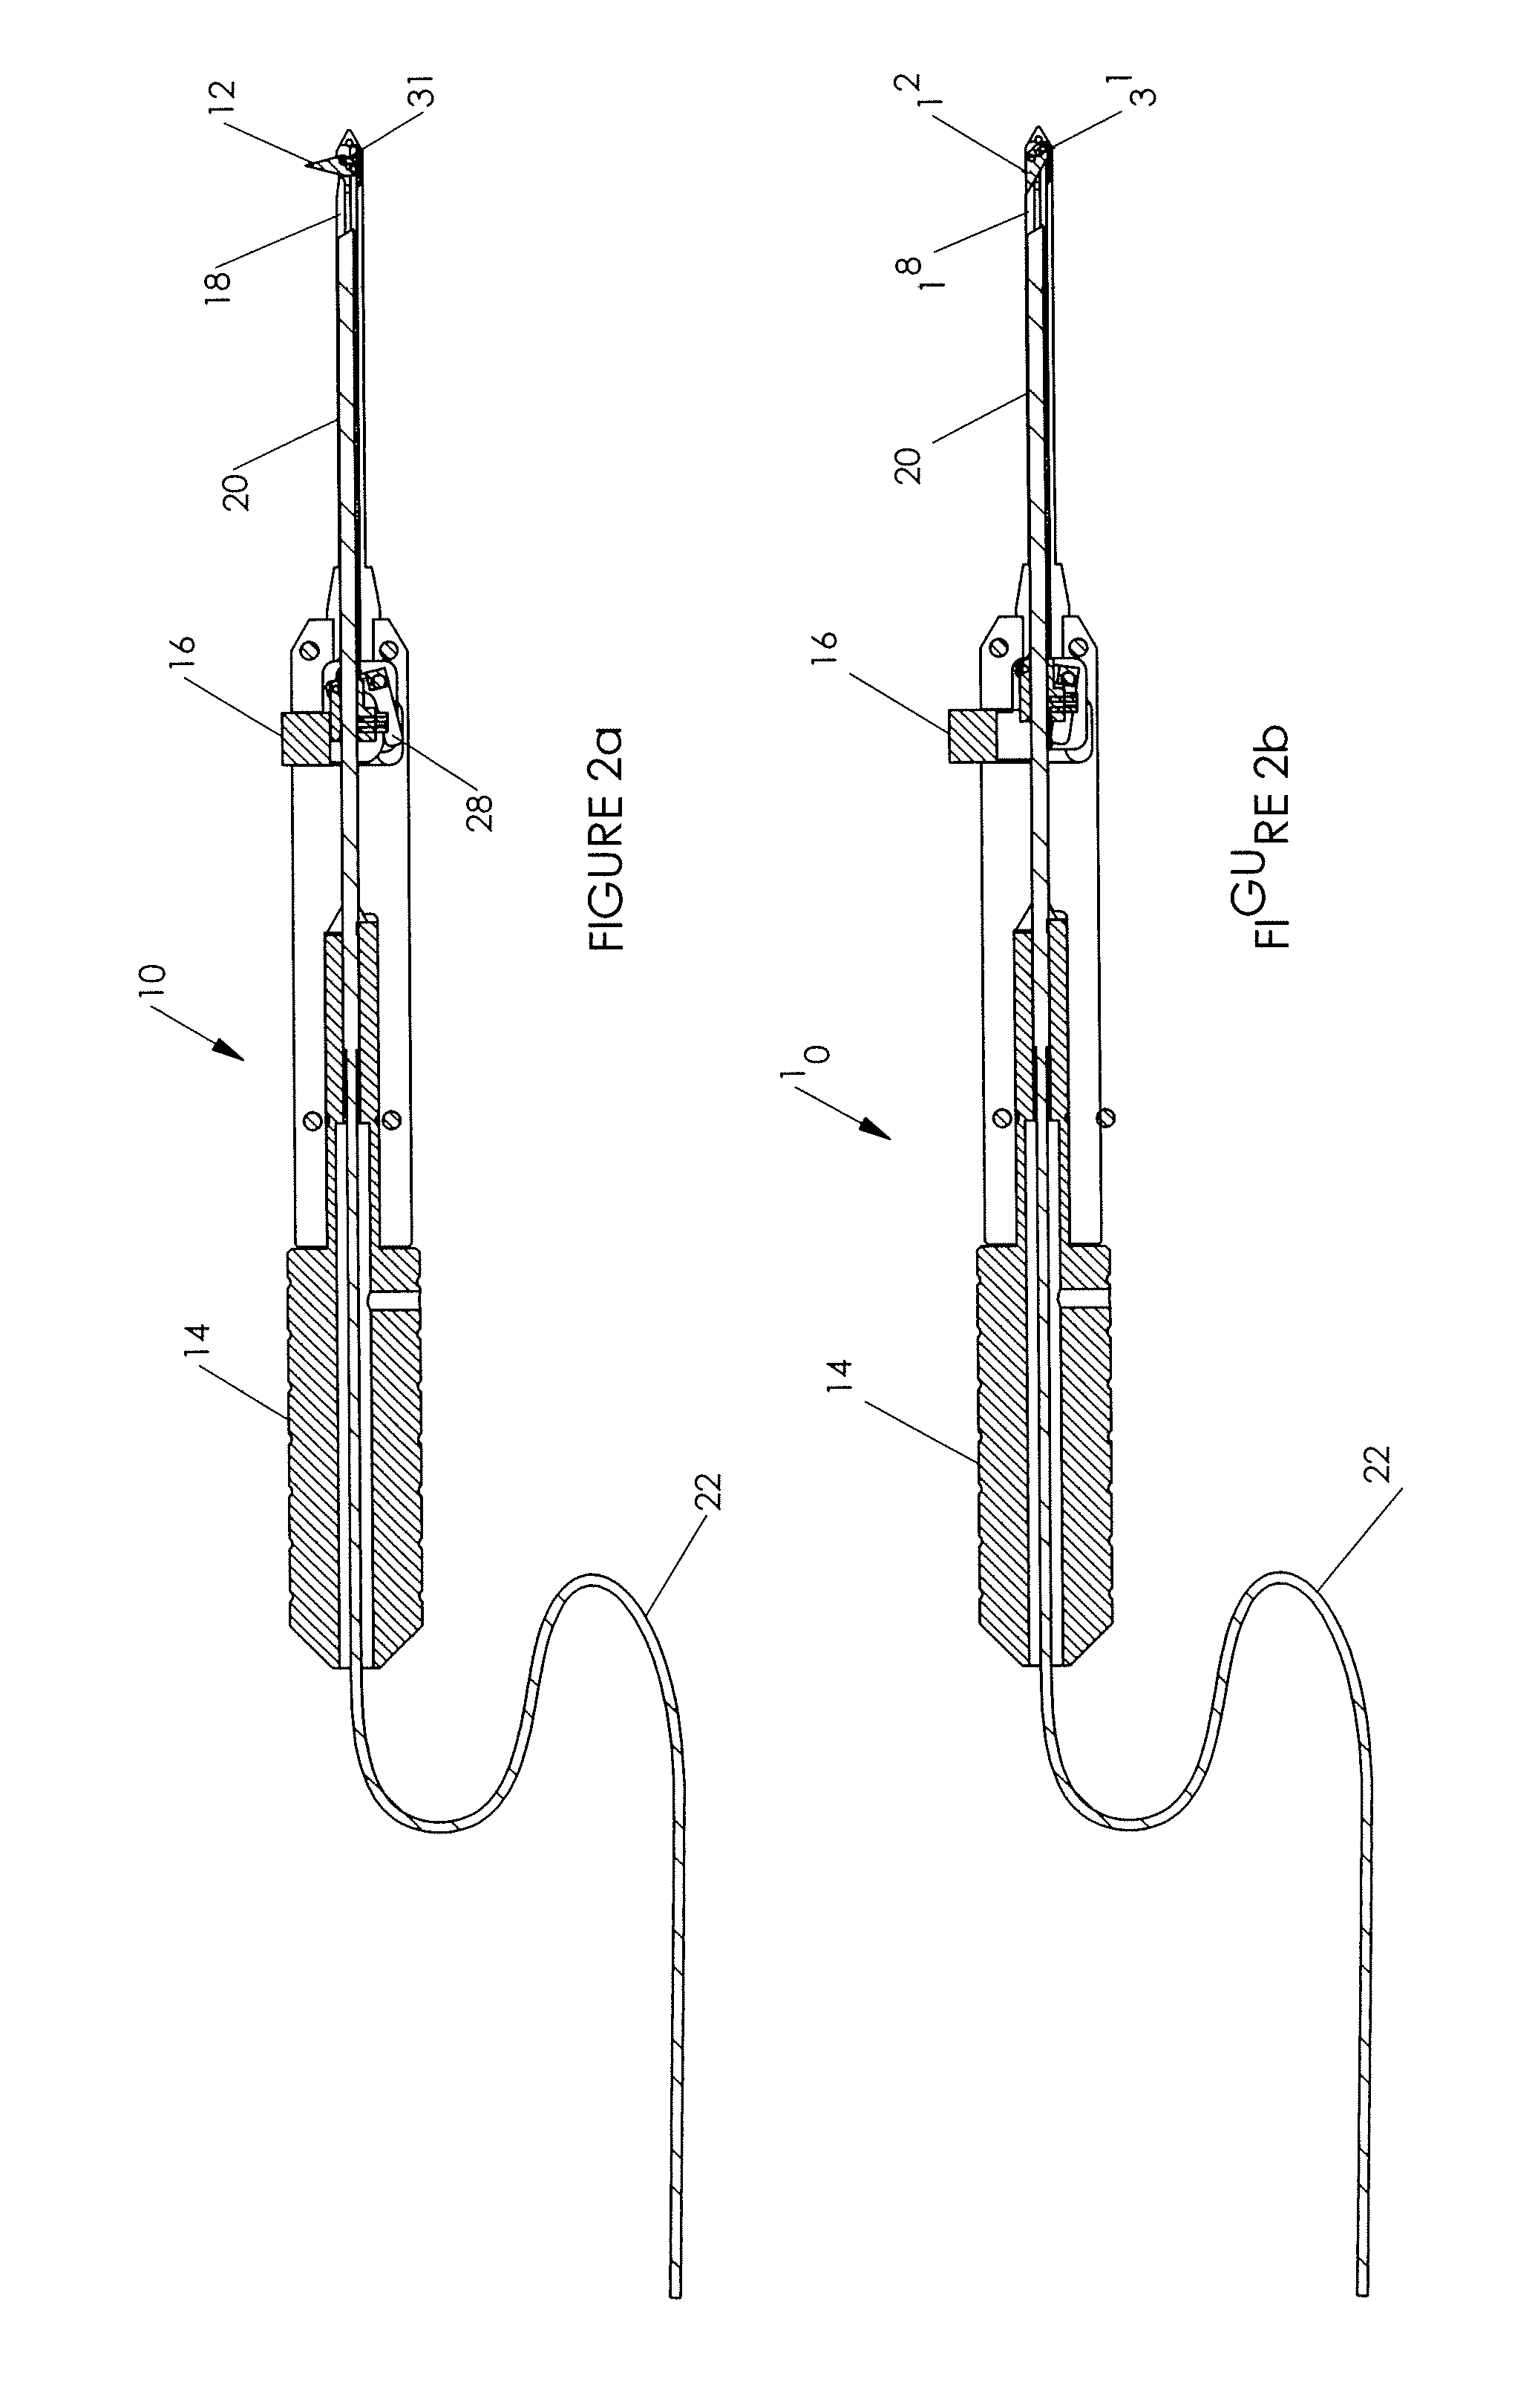 Endoscopic surgical tool